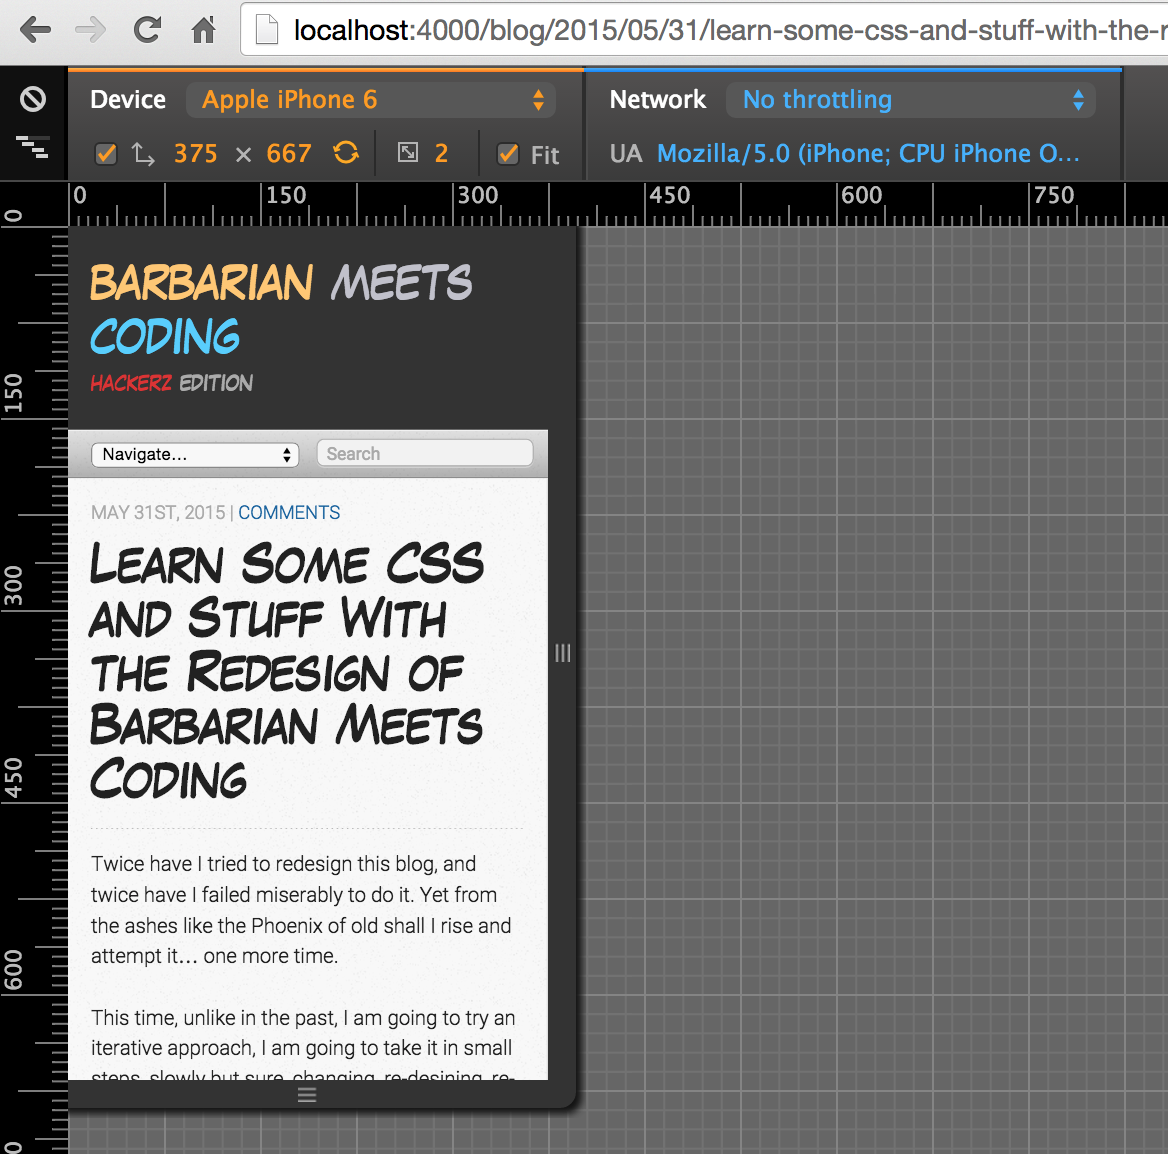 Keeping the old mobile version of barbarian meets coding